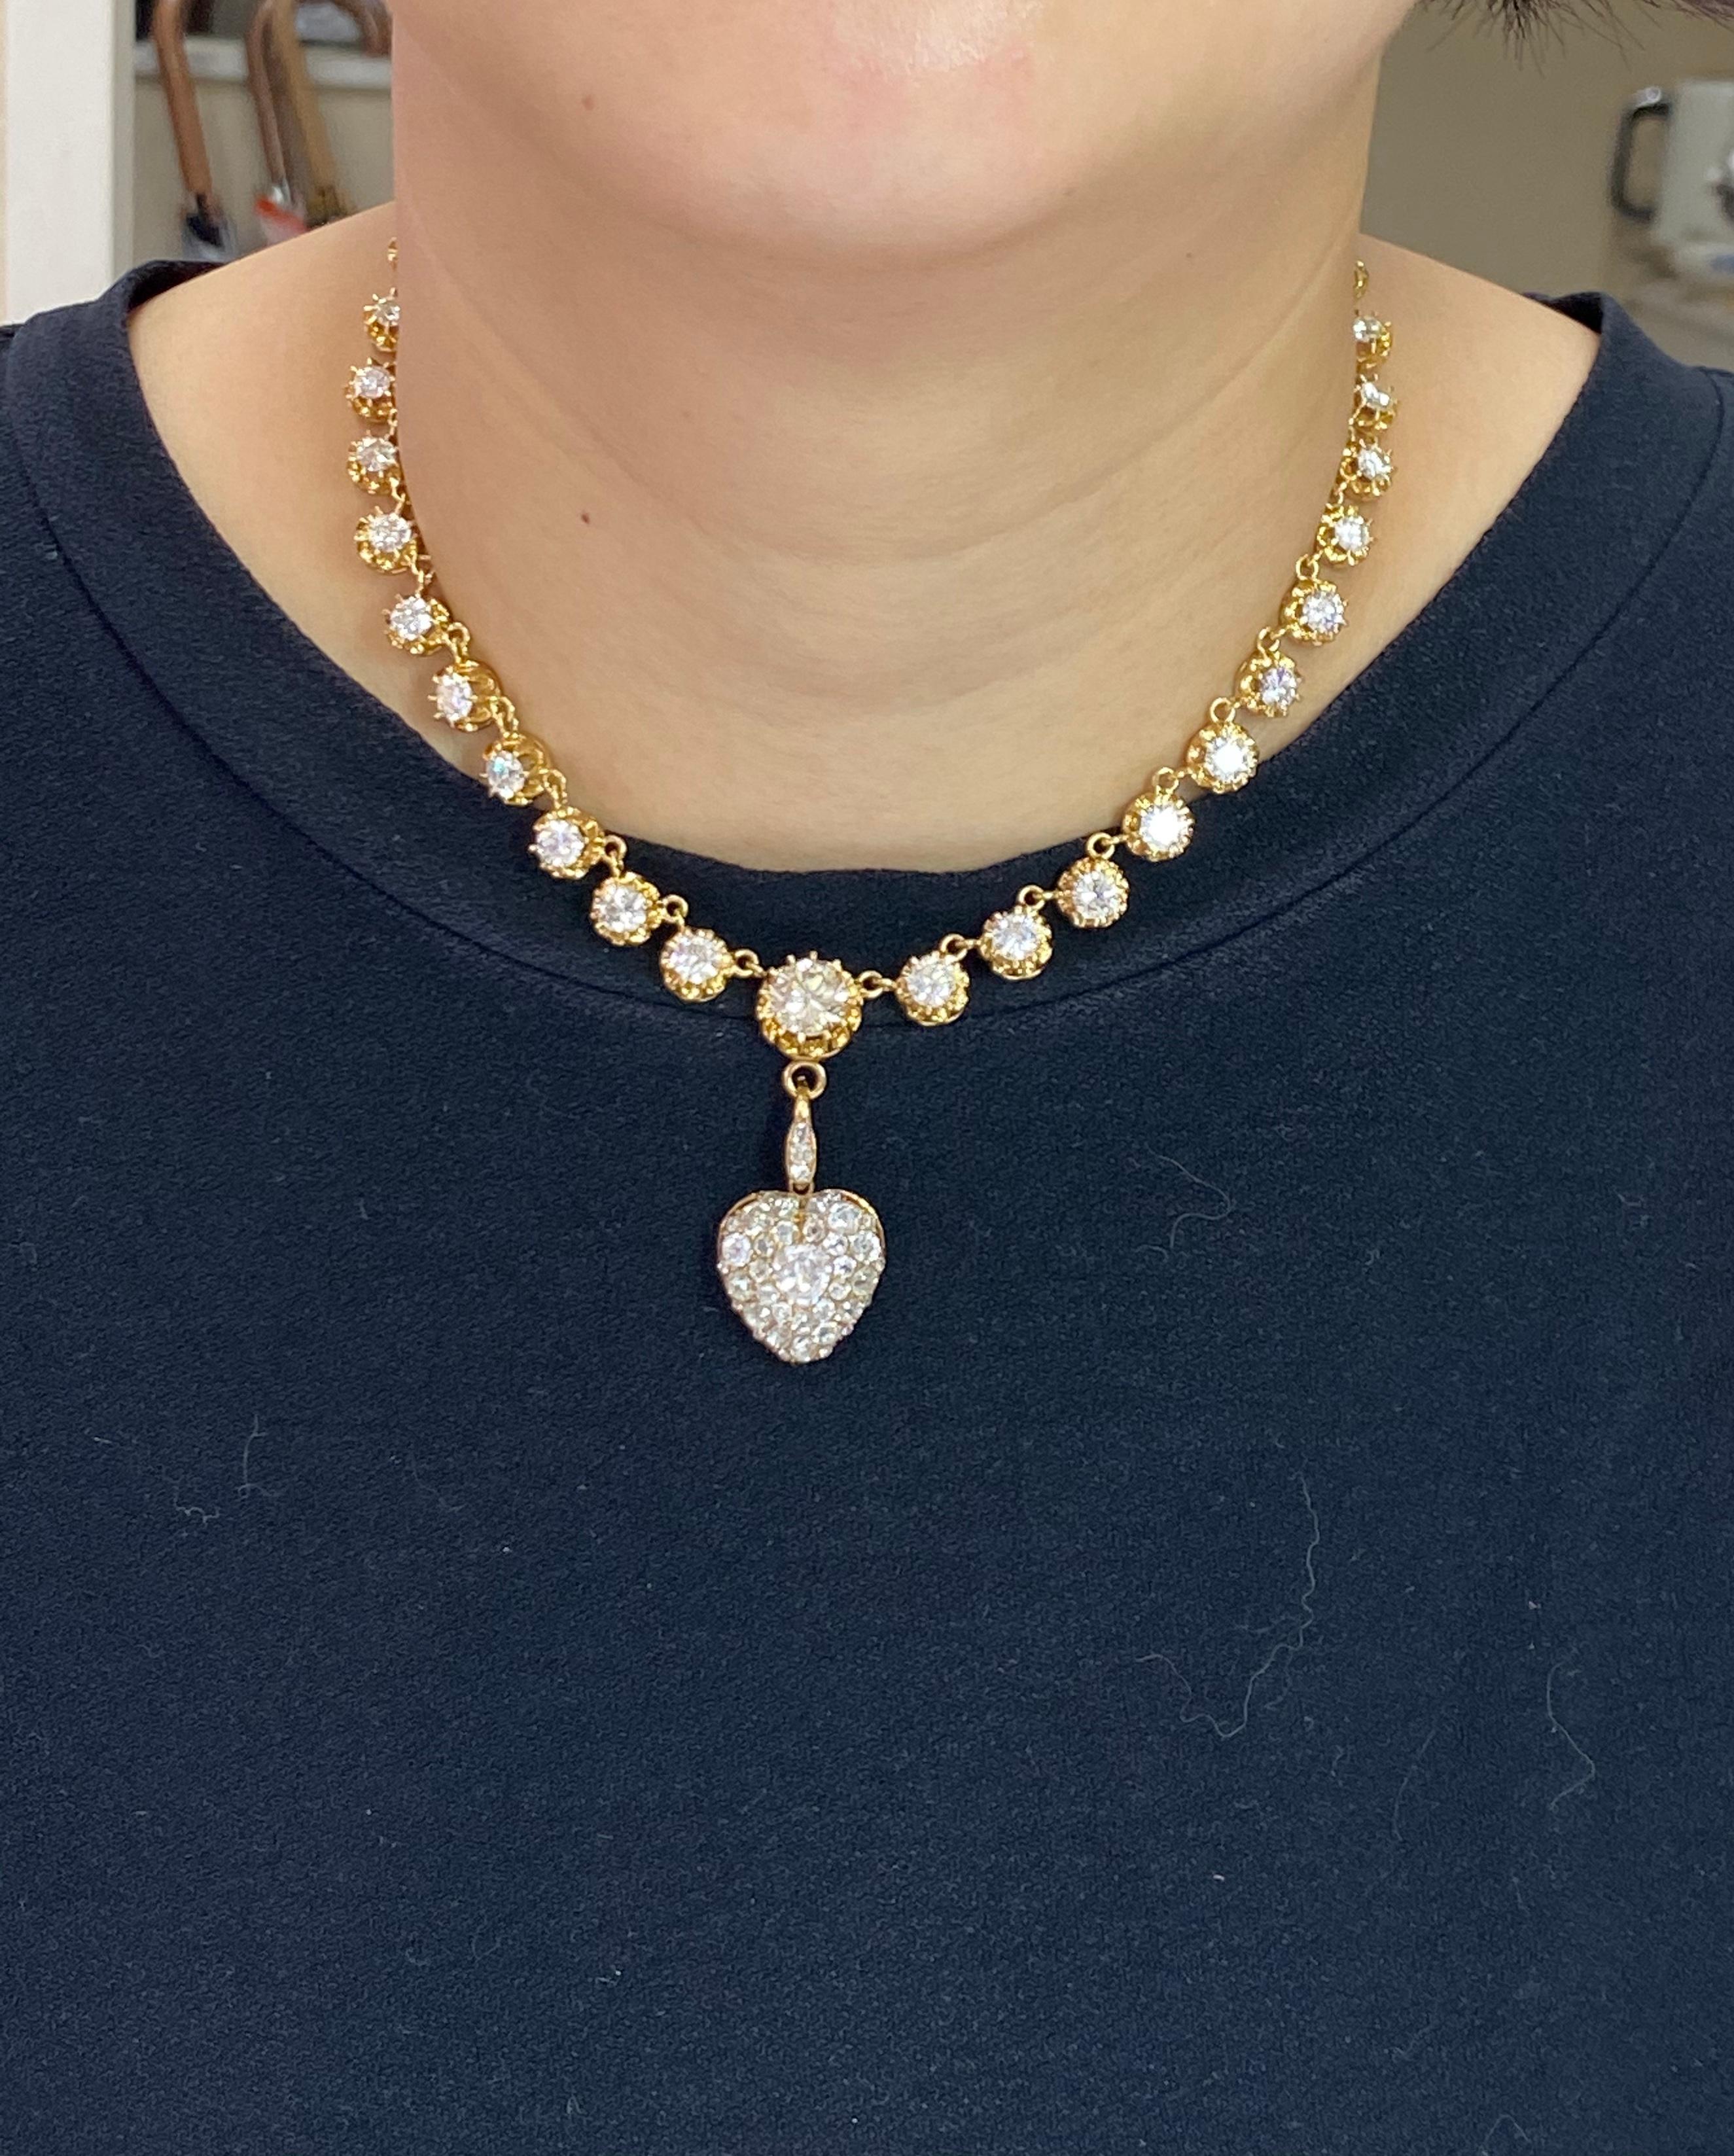 A piece of history. This very important necklace we bought from a major auction house over 10 years ago. We sold the original old mine cut necklace. The buyer was only interested in the necklace at that time. We then duplicated the original necklace